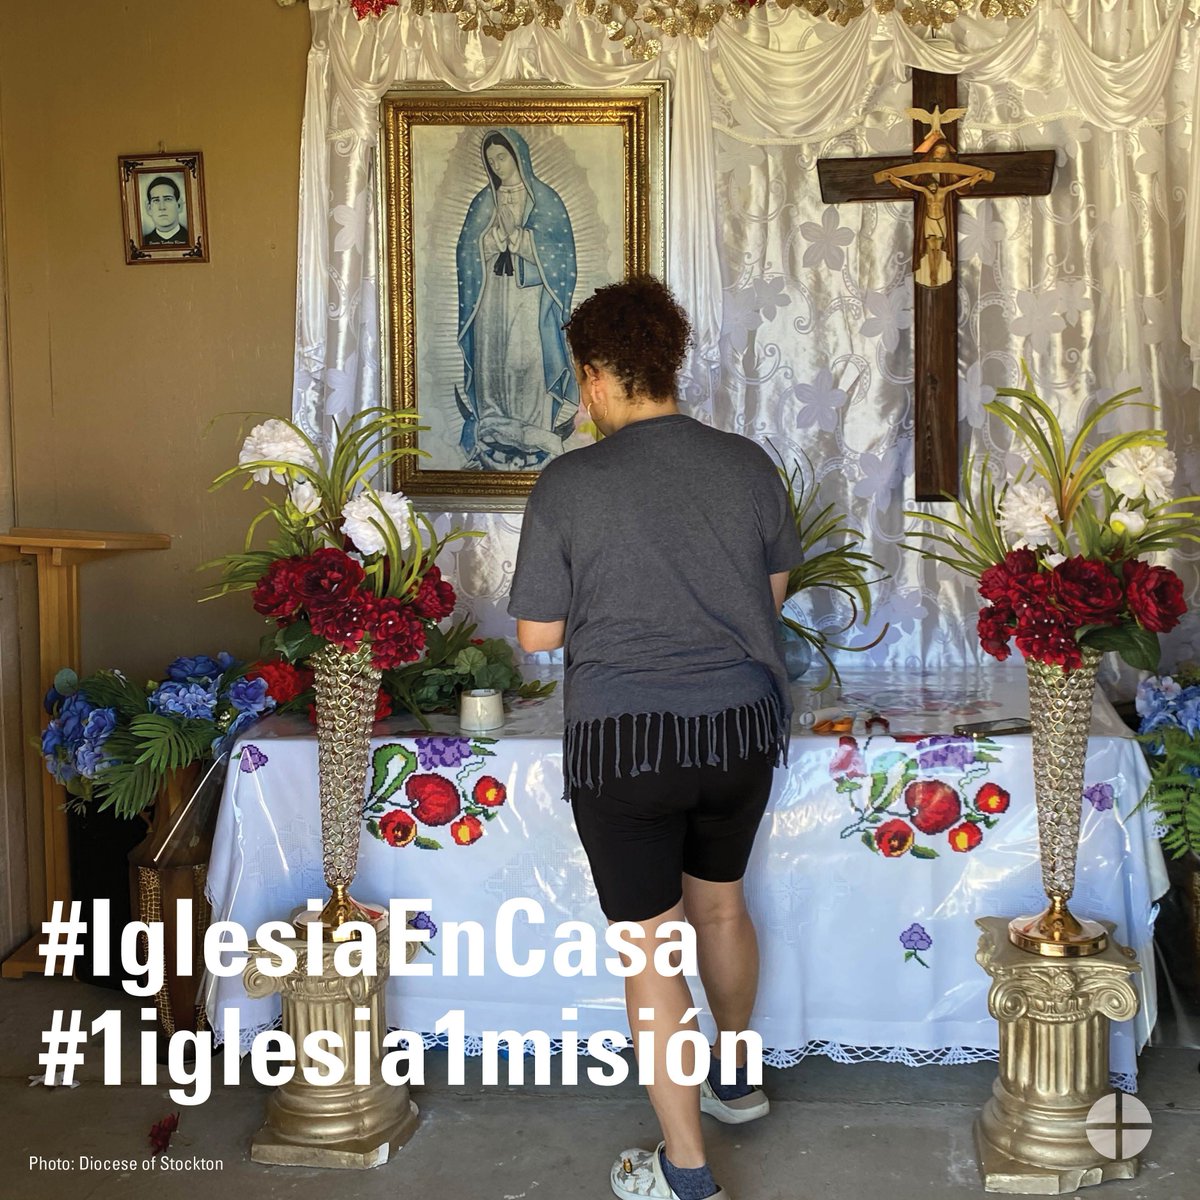 The #CatholicHomeMissionsAppeal strengthens the #ChurchAtHome and supports pastoral projects here in the United States. Read more: buff.ly/2Vu57eI. #1church1mission #IglesiaEnCasa #1iglesia1misión #IglesiaAquí #HolySpirit #HS #Catholic